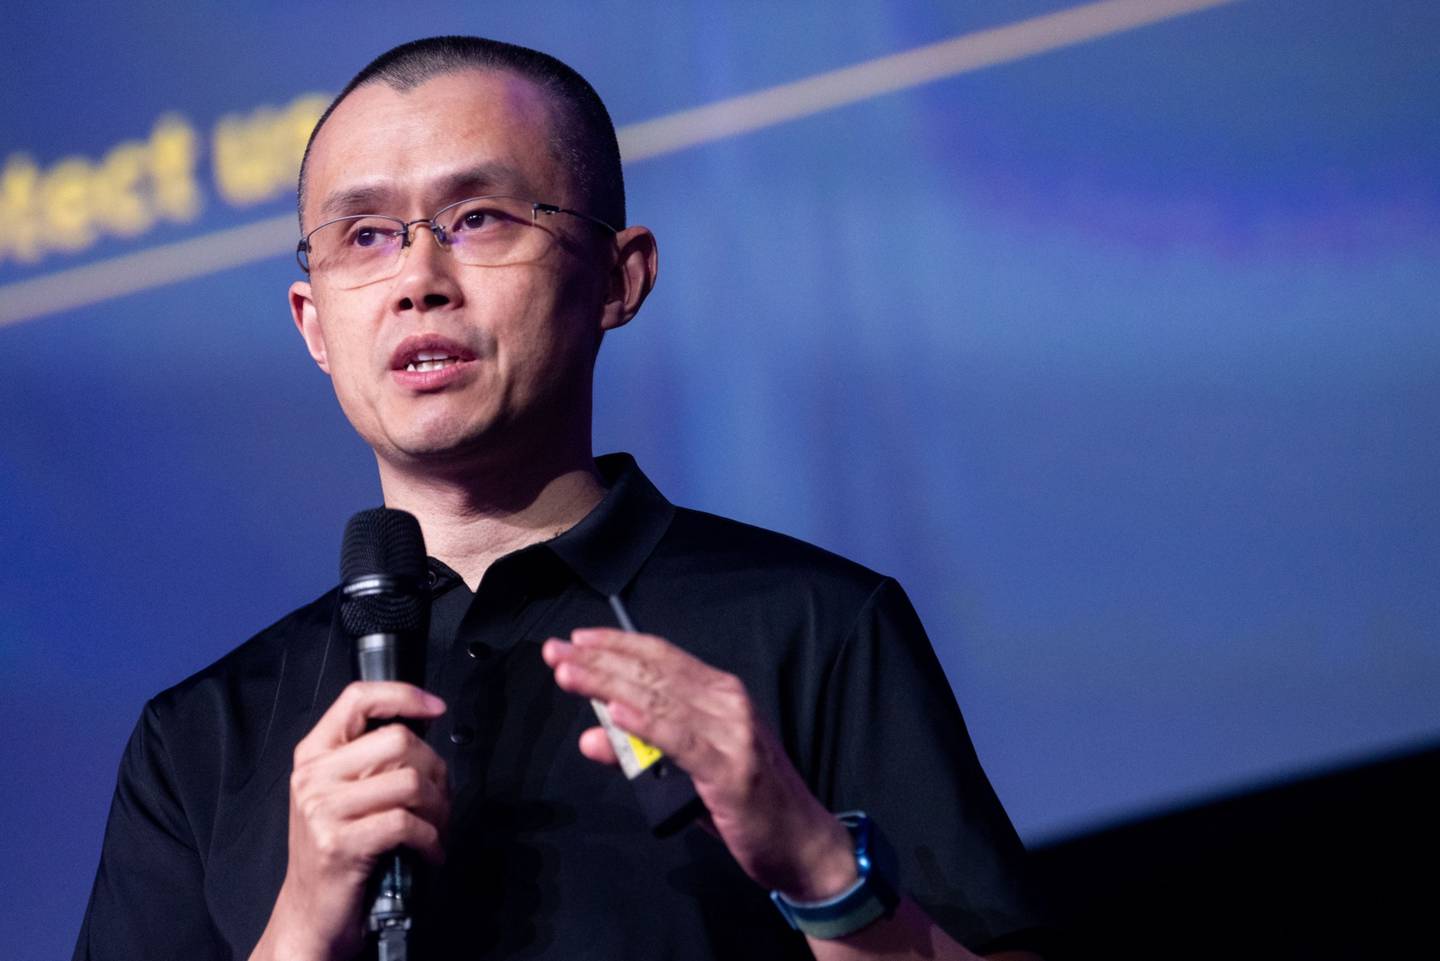 Zhao Changpeng, CEO and founder of Binance